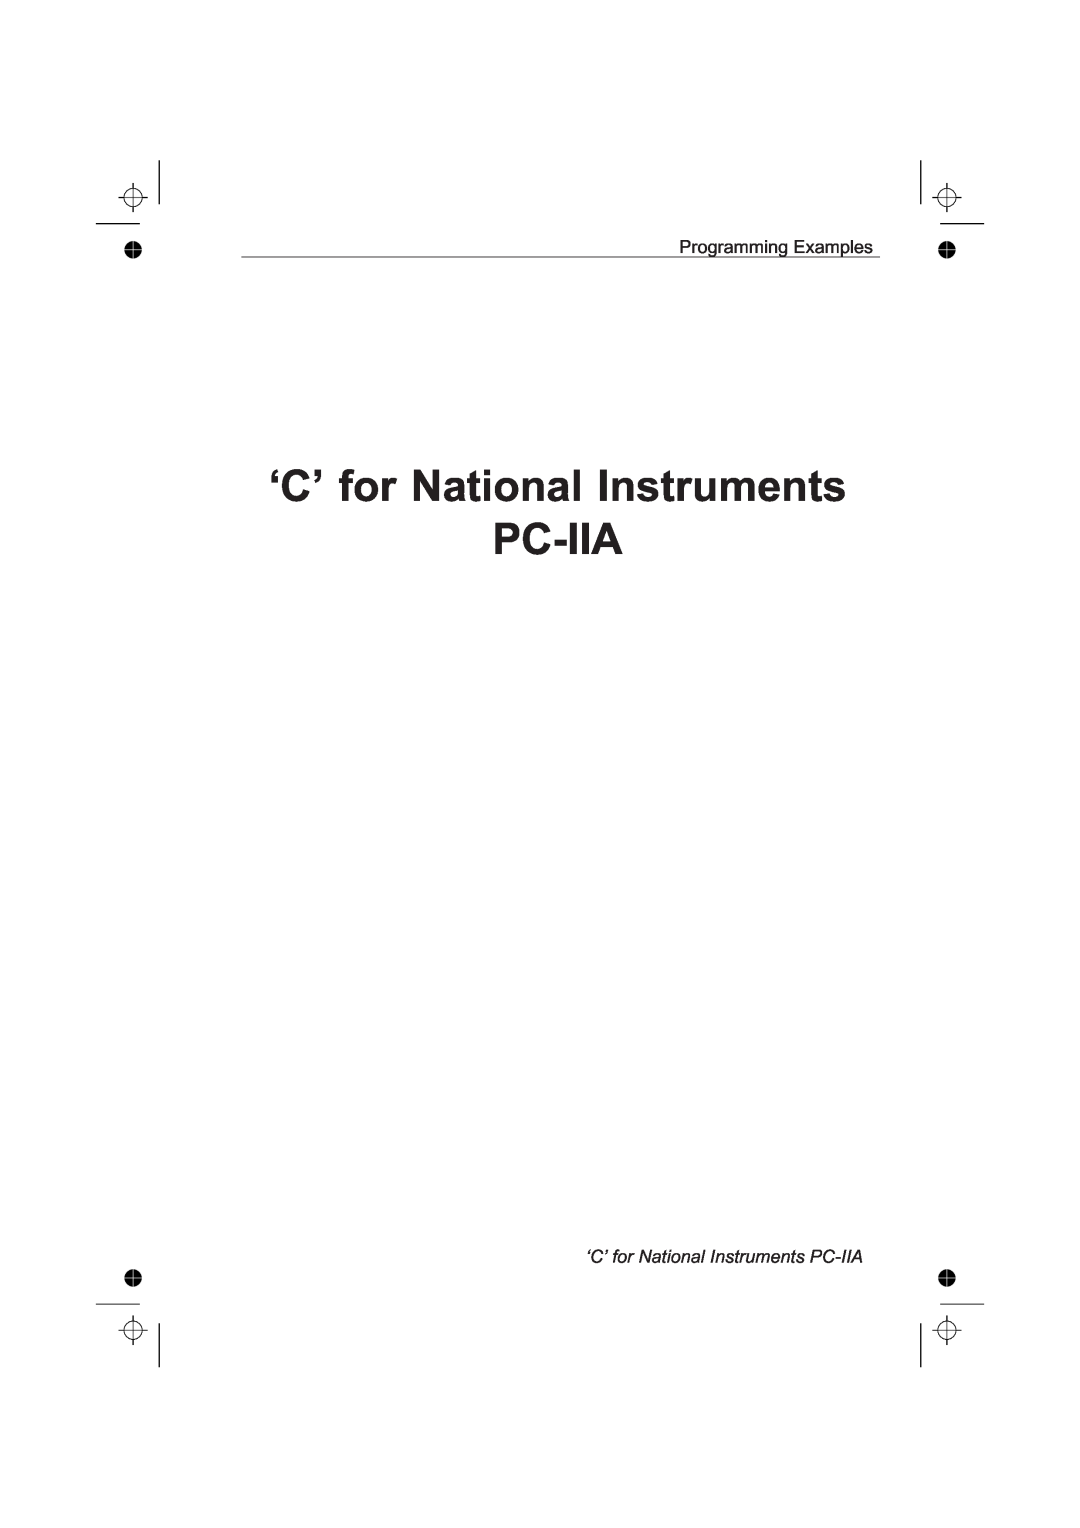 Fluke PM6681R, PM6685R manual ‘C’ for National Instruments PC-IIA 